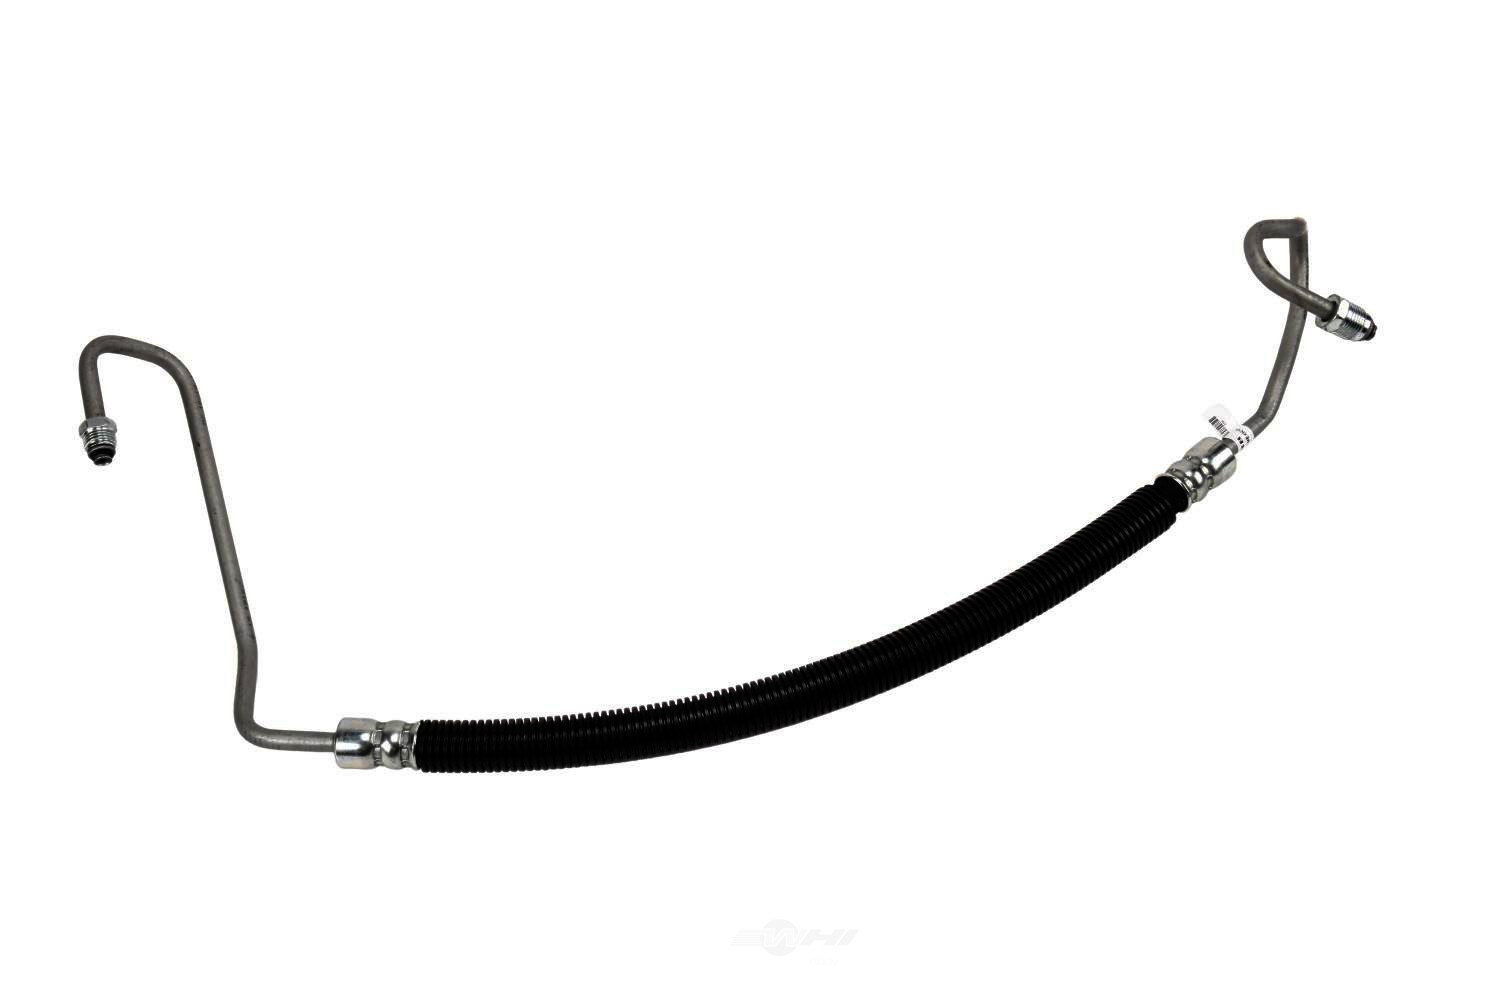 GM GENUINE PARTS - Power Steering Pressure Hose (To Gear) - GMP 15295838